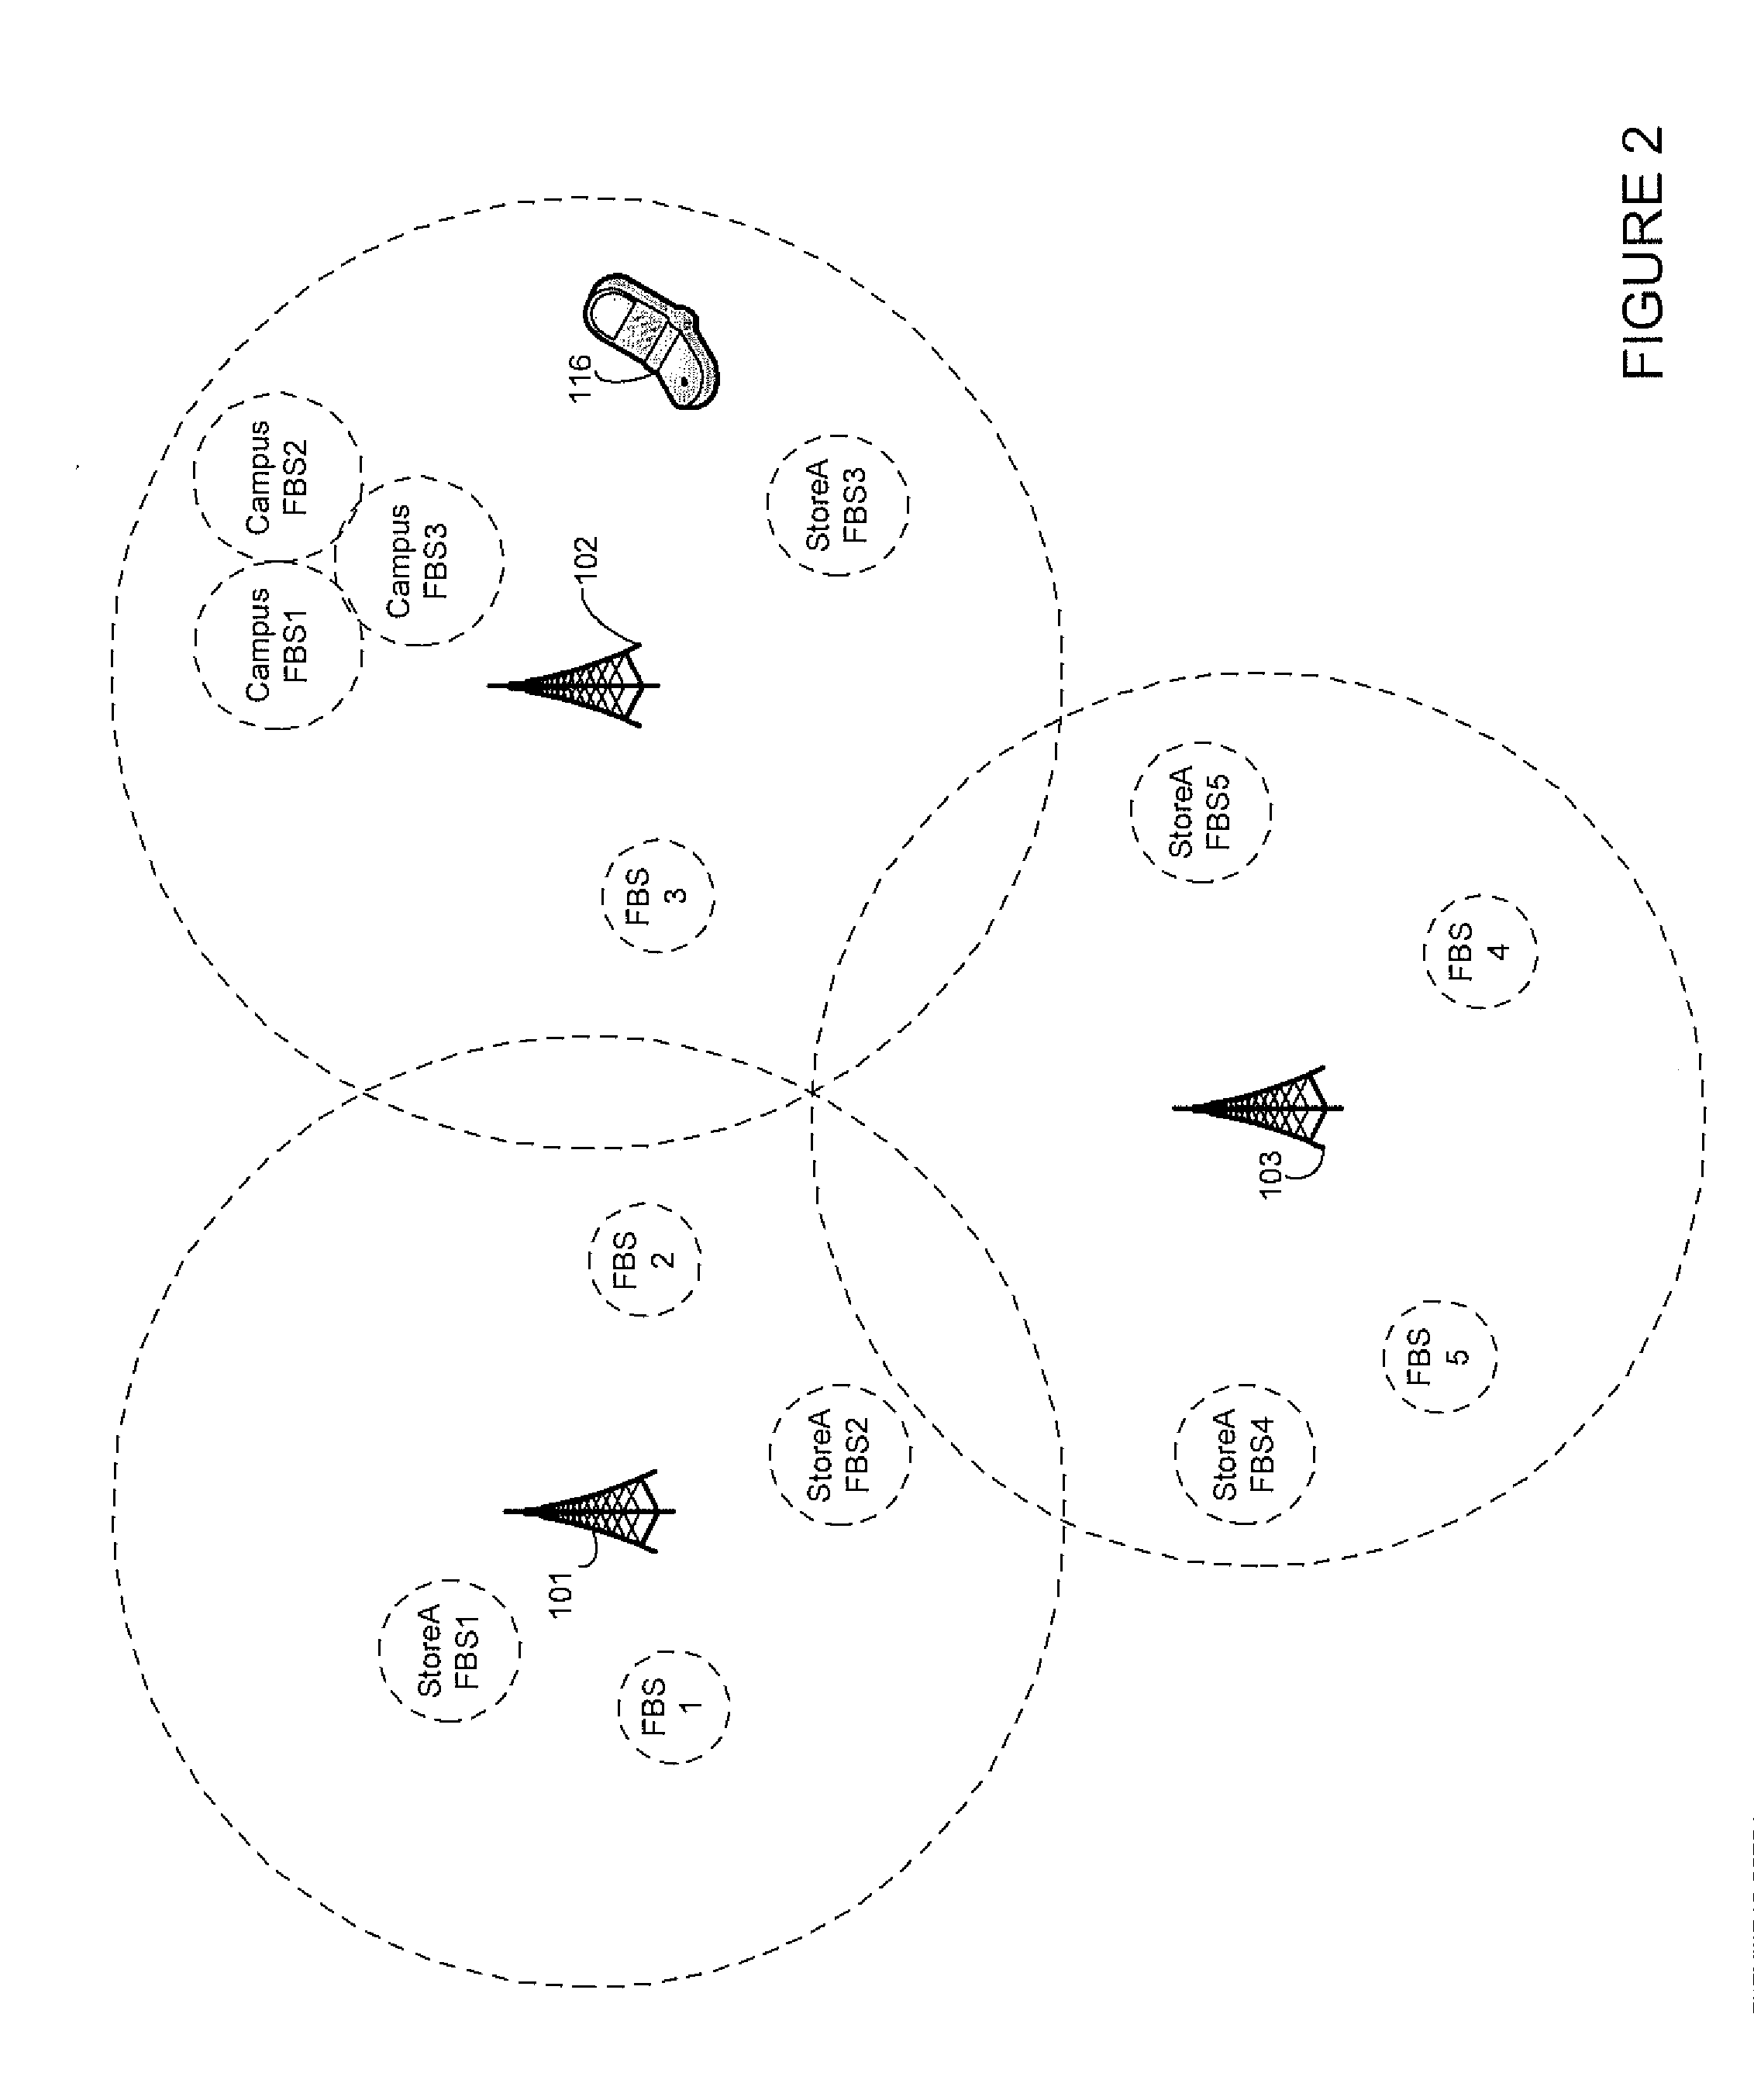 Systems and methods for cell search in multi-tier communication systems